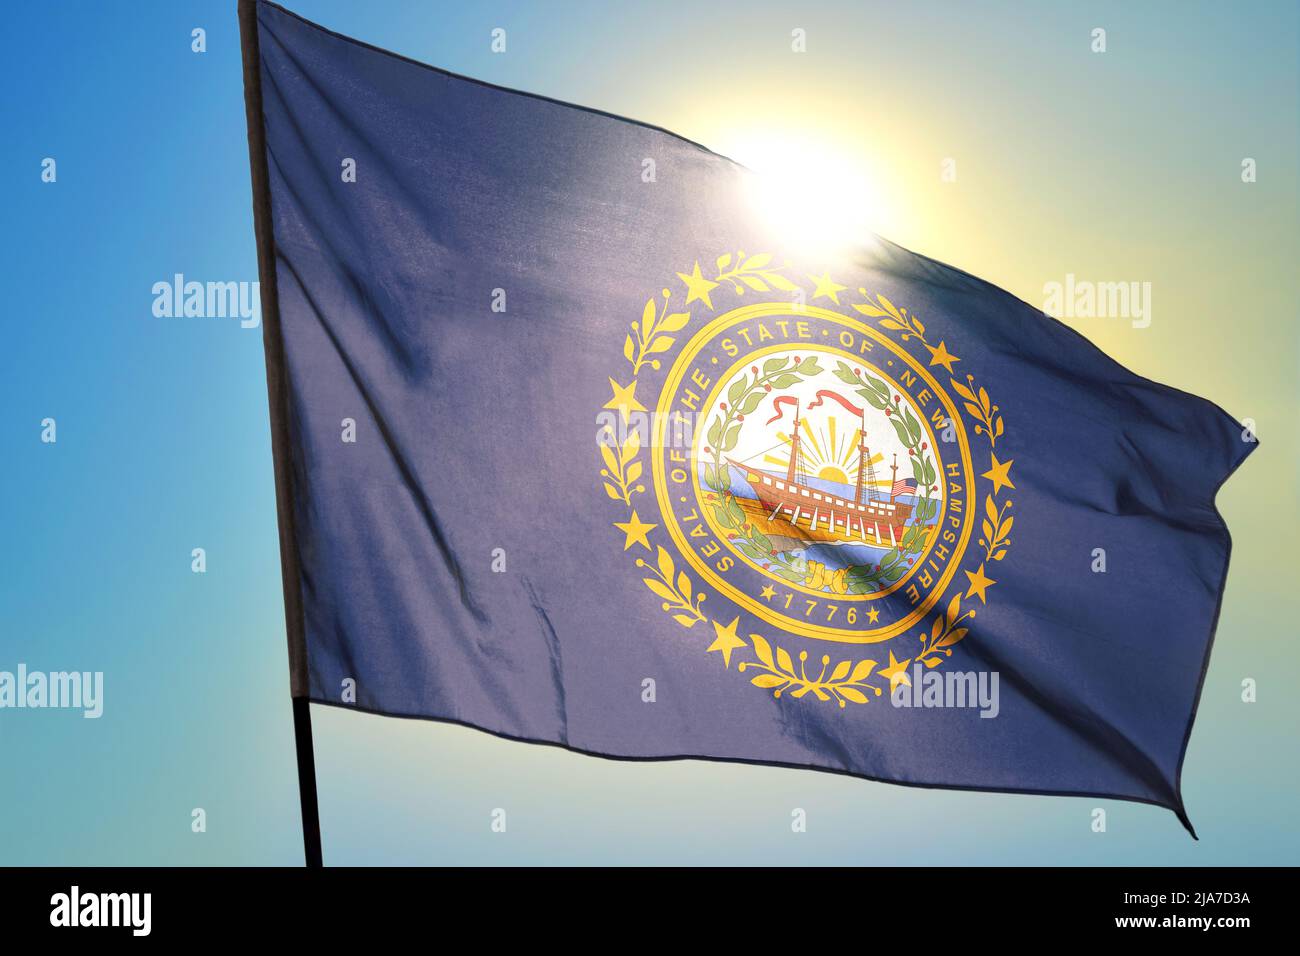 New Hampshire state of United States flag waving on the wind Stock Photo